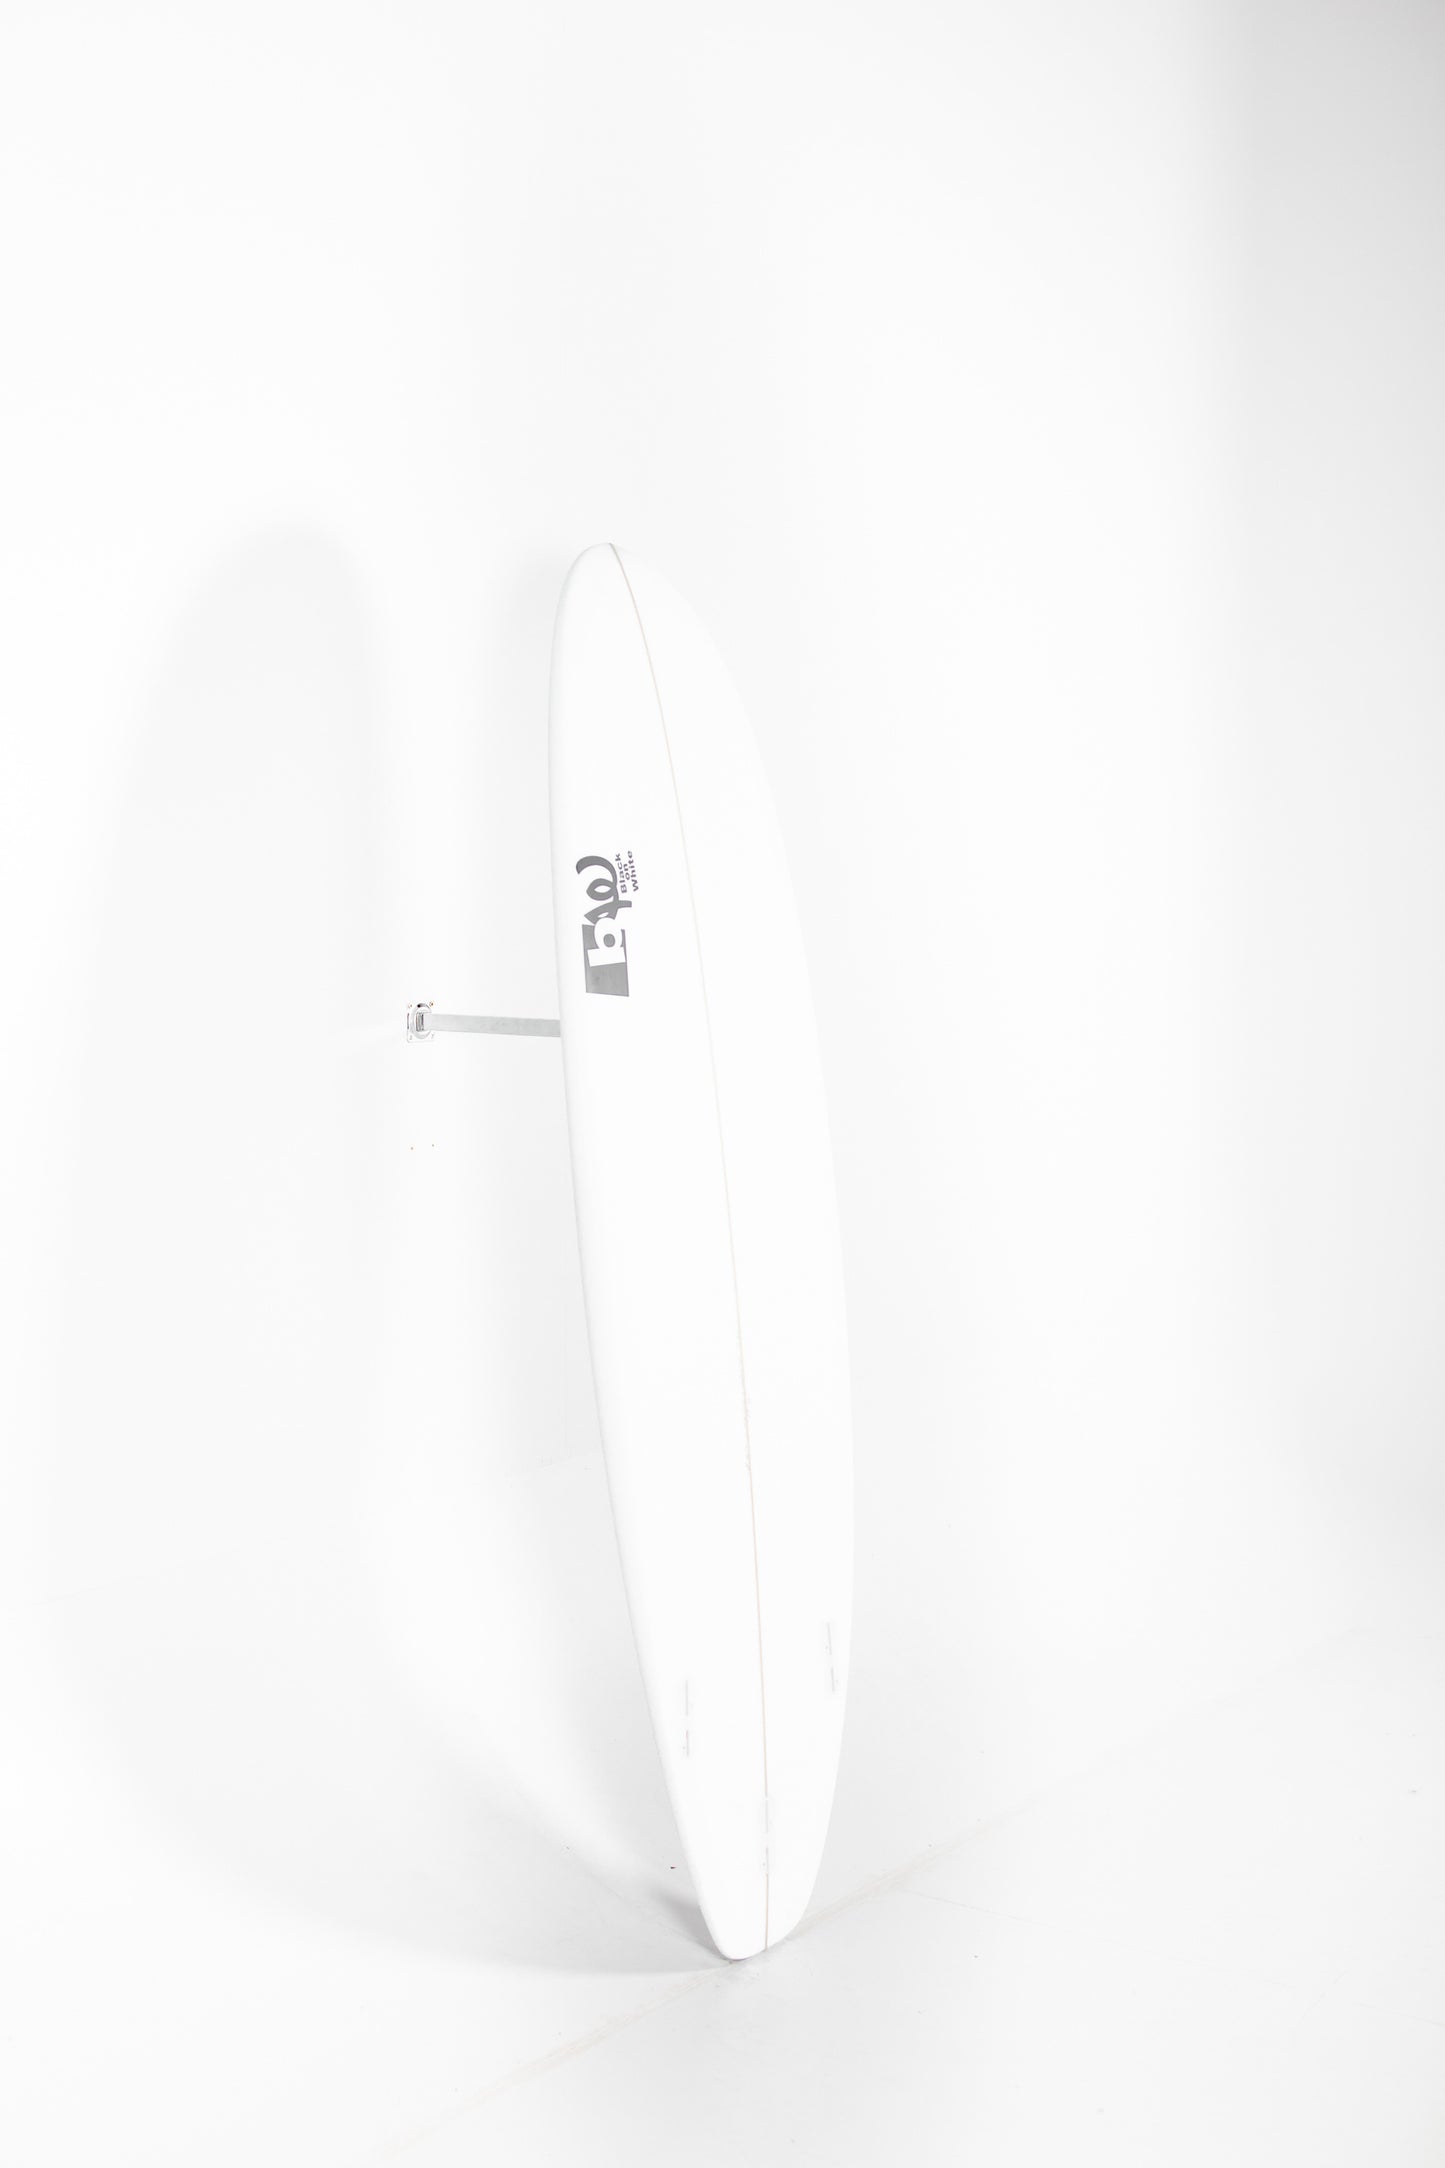 
                  
                    BW SURFBOARDS - BW SURFBOARDS Potato 6'4" x 22 5/8 x 2 3/4 x 47.7L. at PUKAS SURF SHOP
                  
                